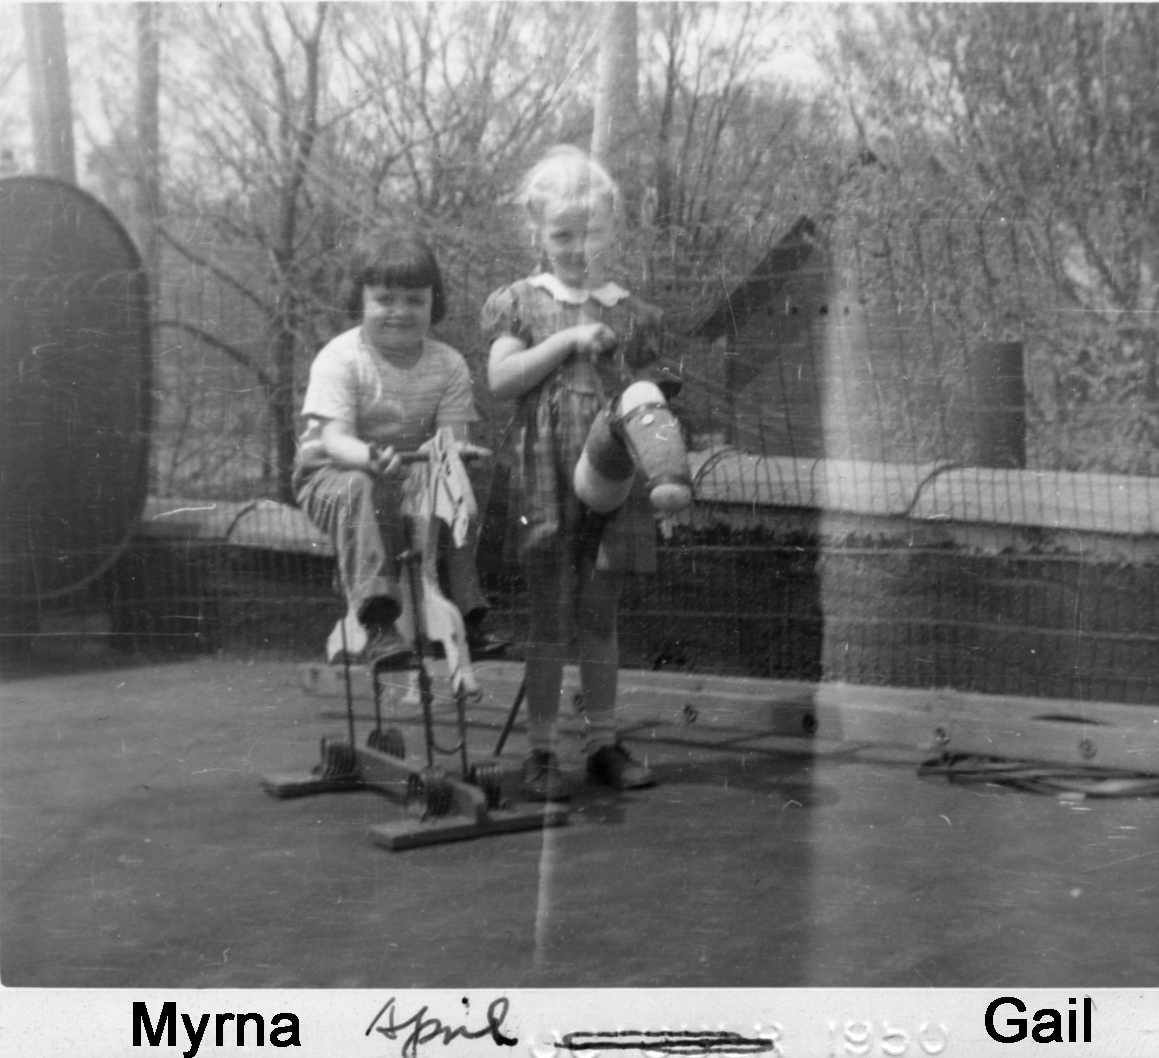 Myrna Moericke and Gail Paton on play horses in April 1950